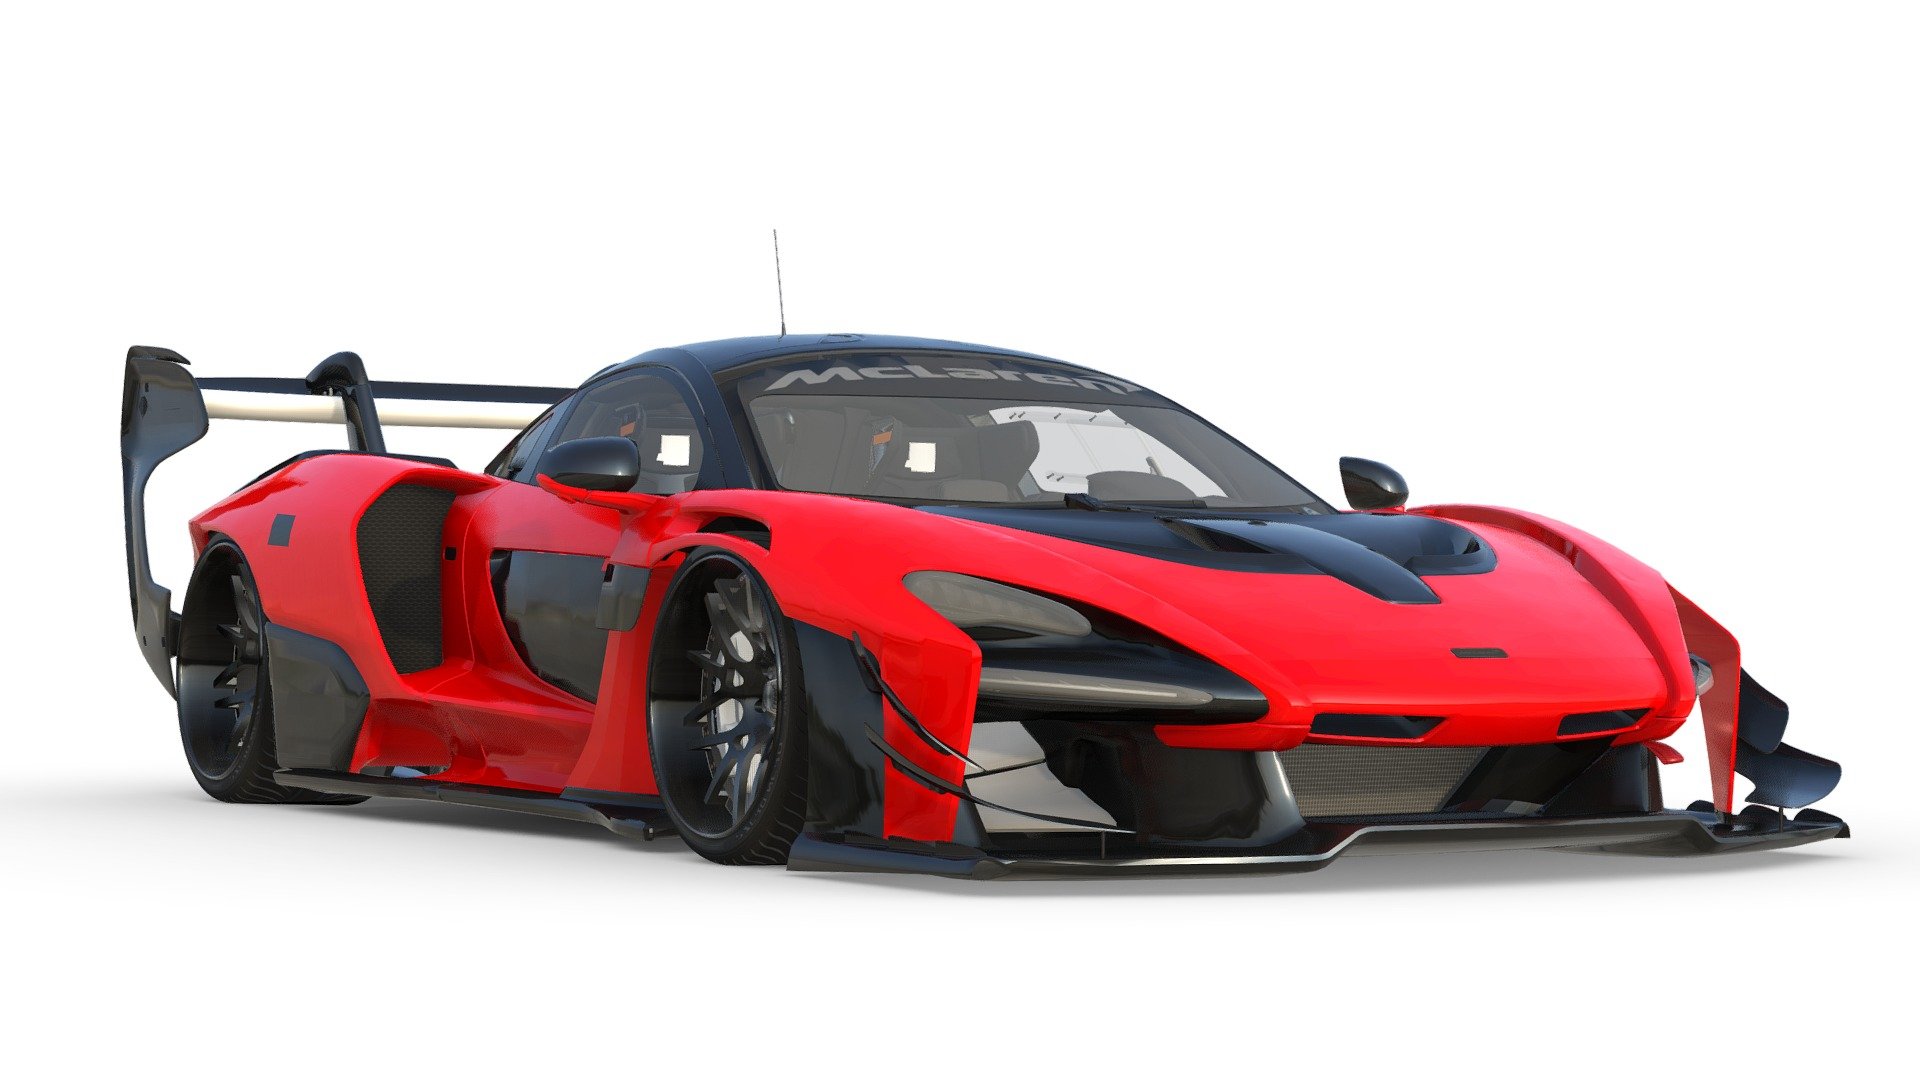 his 3D model represents the iconic McLaren Senna GTR, a high-performance supercar designed for the track enthusiast. With its distinctive aerodynamic features and powerful engine, the McLaren Senna GTR is a marvel of automotive engineering. This meticulously detailed 3D model captures the essence of the Senna GTR's sleek and aggressive design, making it ideal for automotive enthusiasts, digital artists, and anyone passionate about luxury sports cars. Whether you're using it for visualization projects, simulations, or simply admiring its beauty, this 3D model of the McLaren Senna GTR is sure to impress 3d model